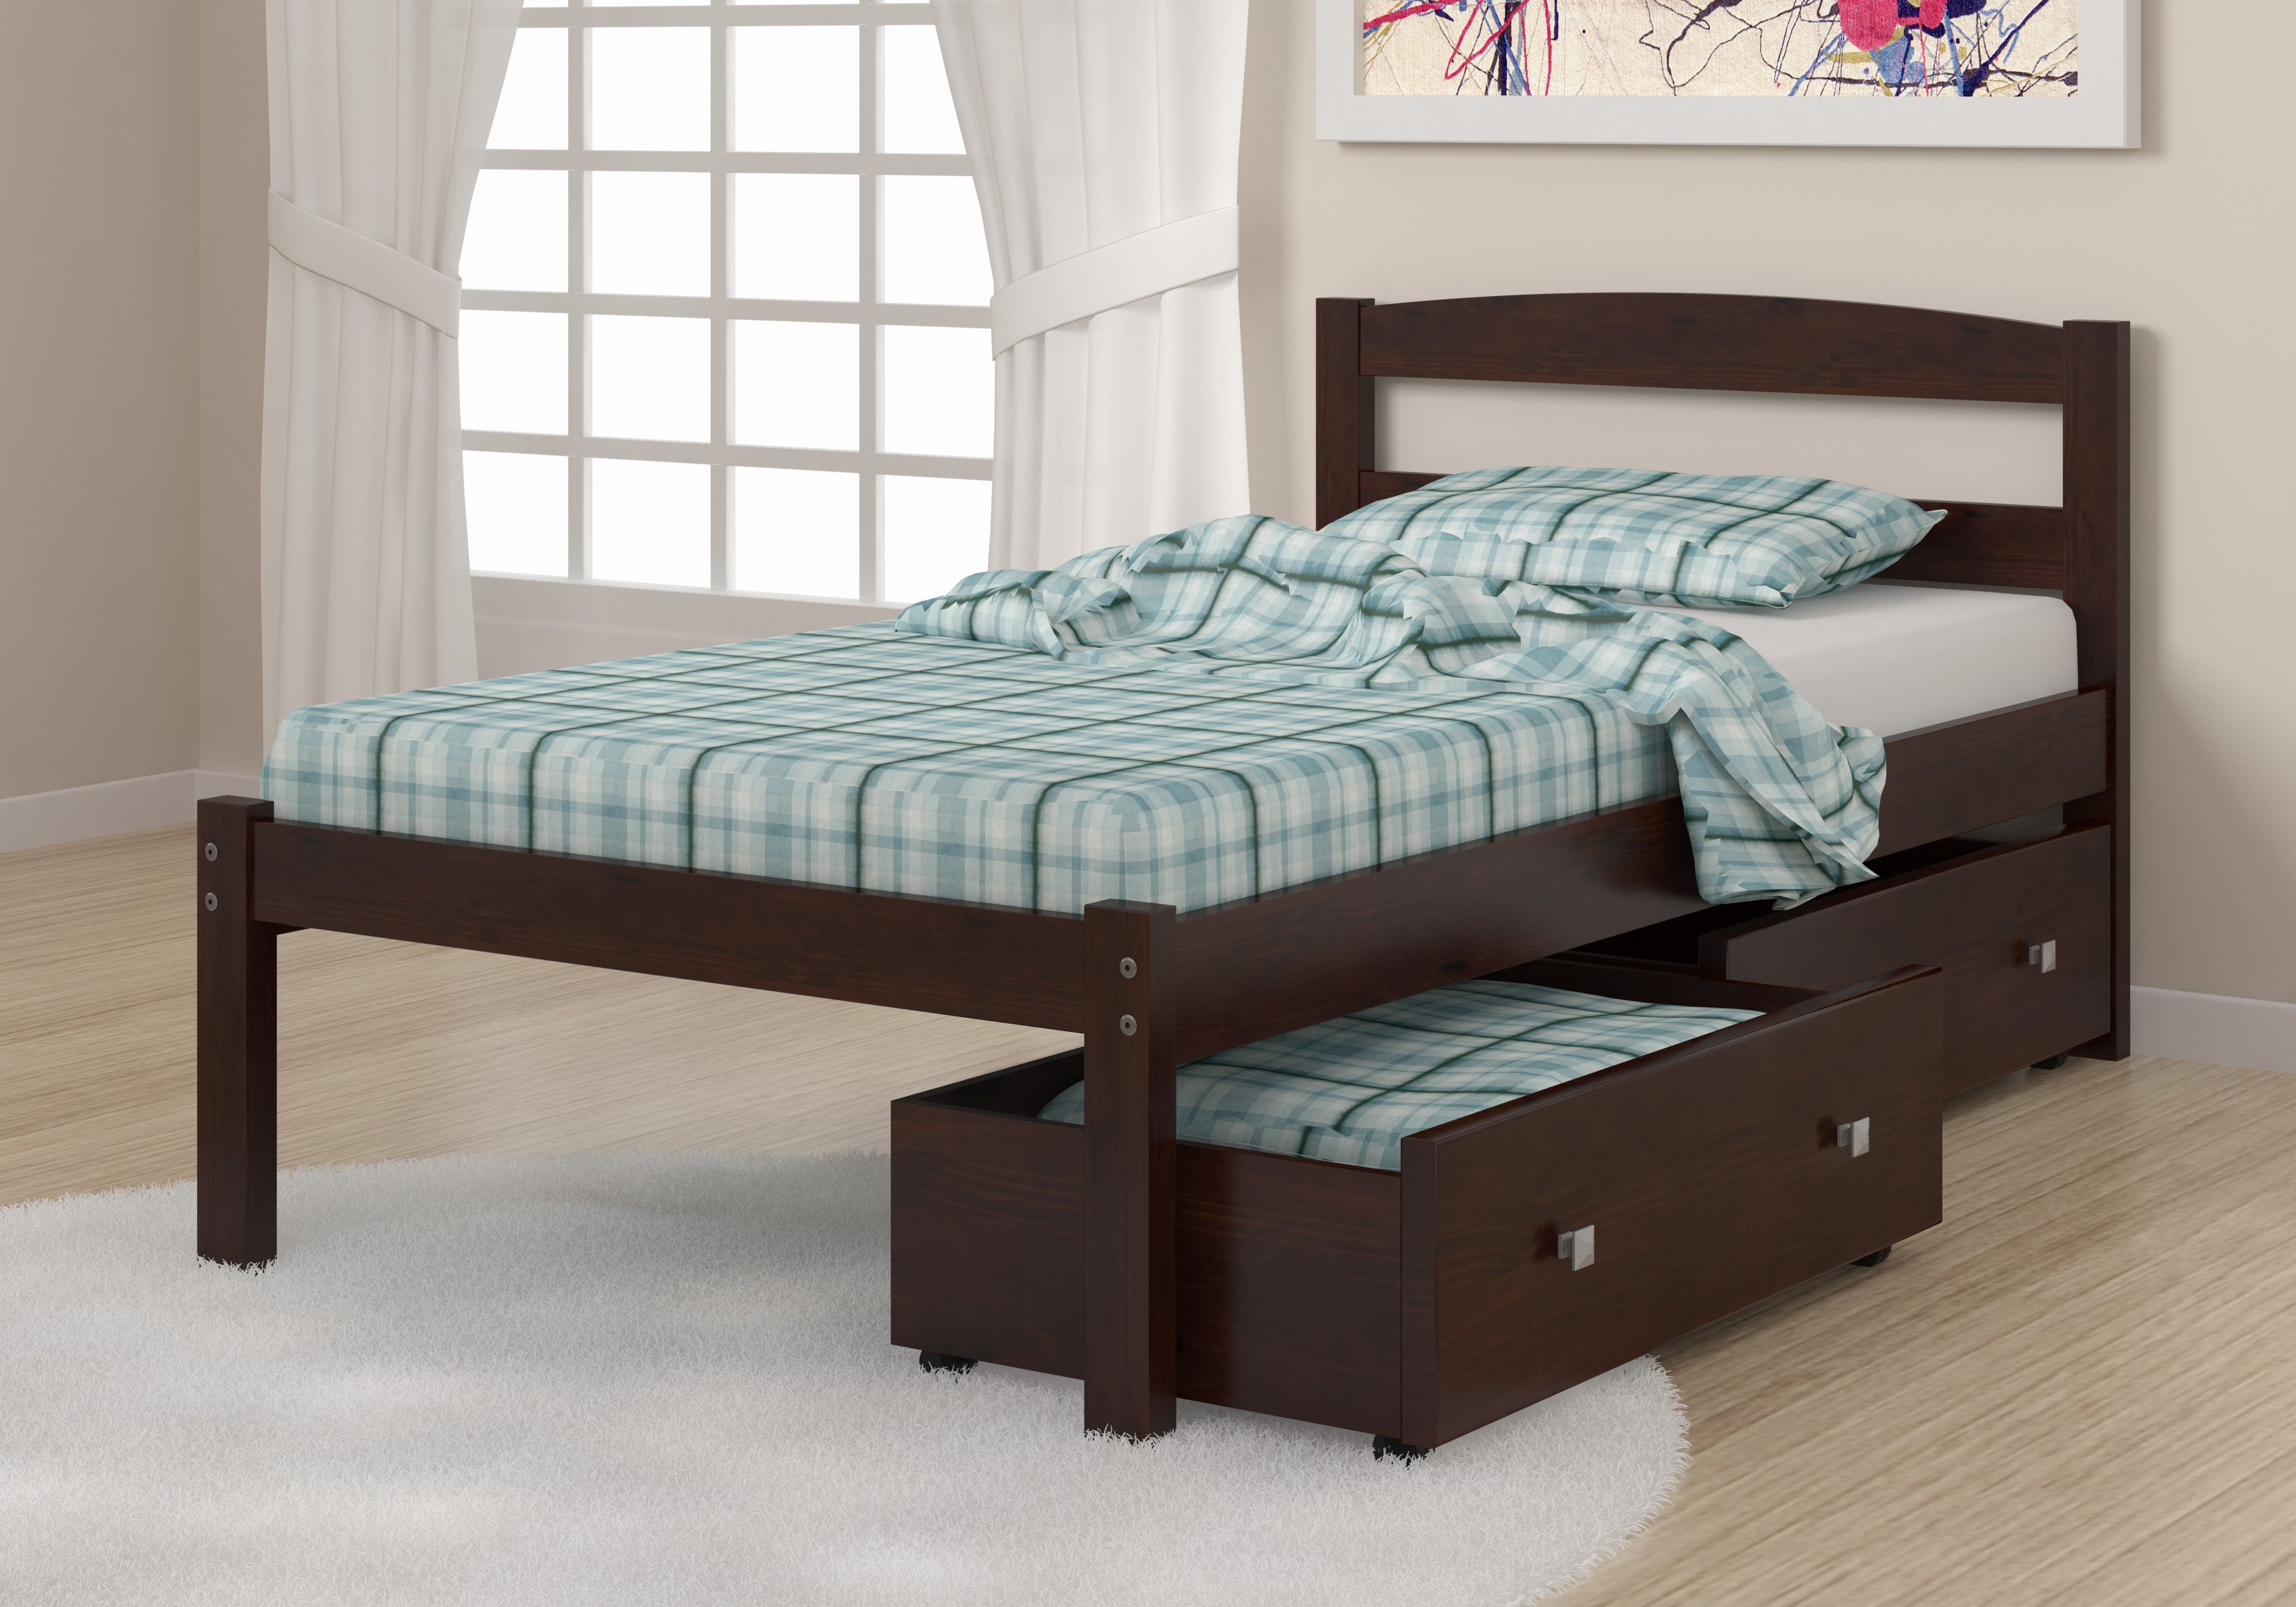 Donco Trading Company Econo Twin Bed With Dual Under Bed Drawers